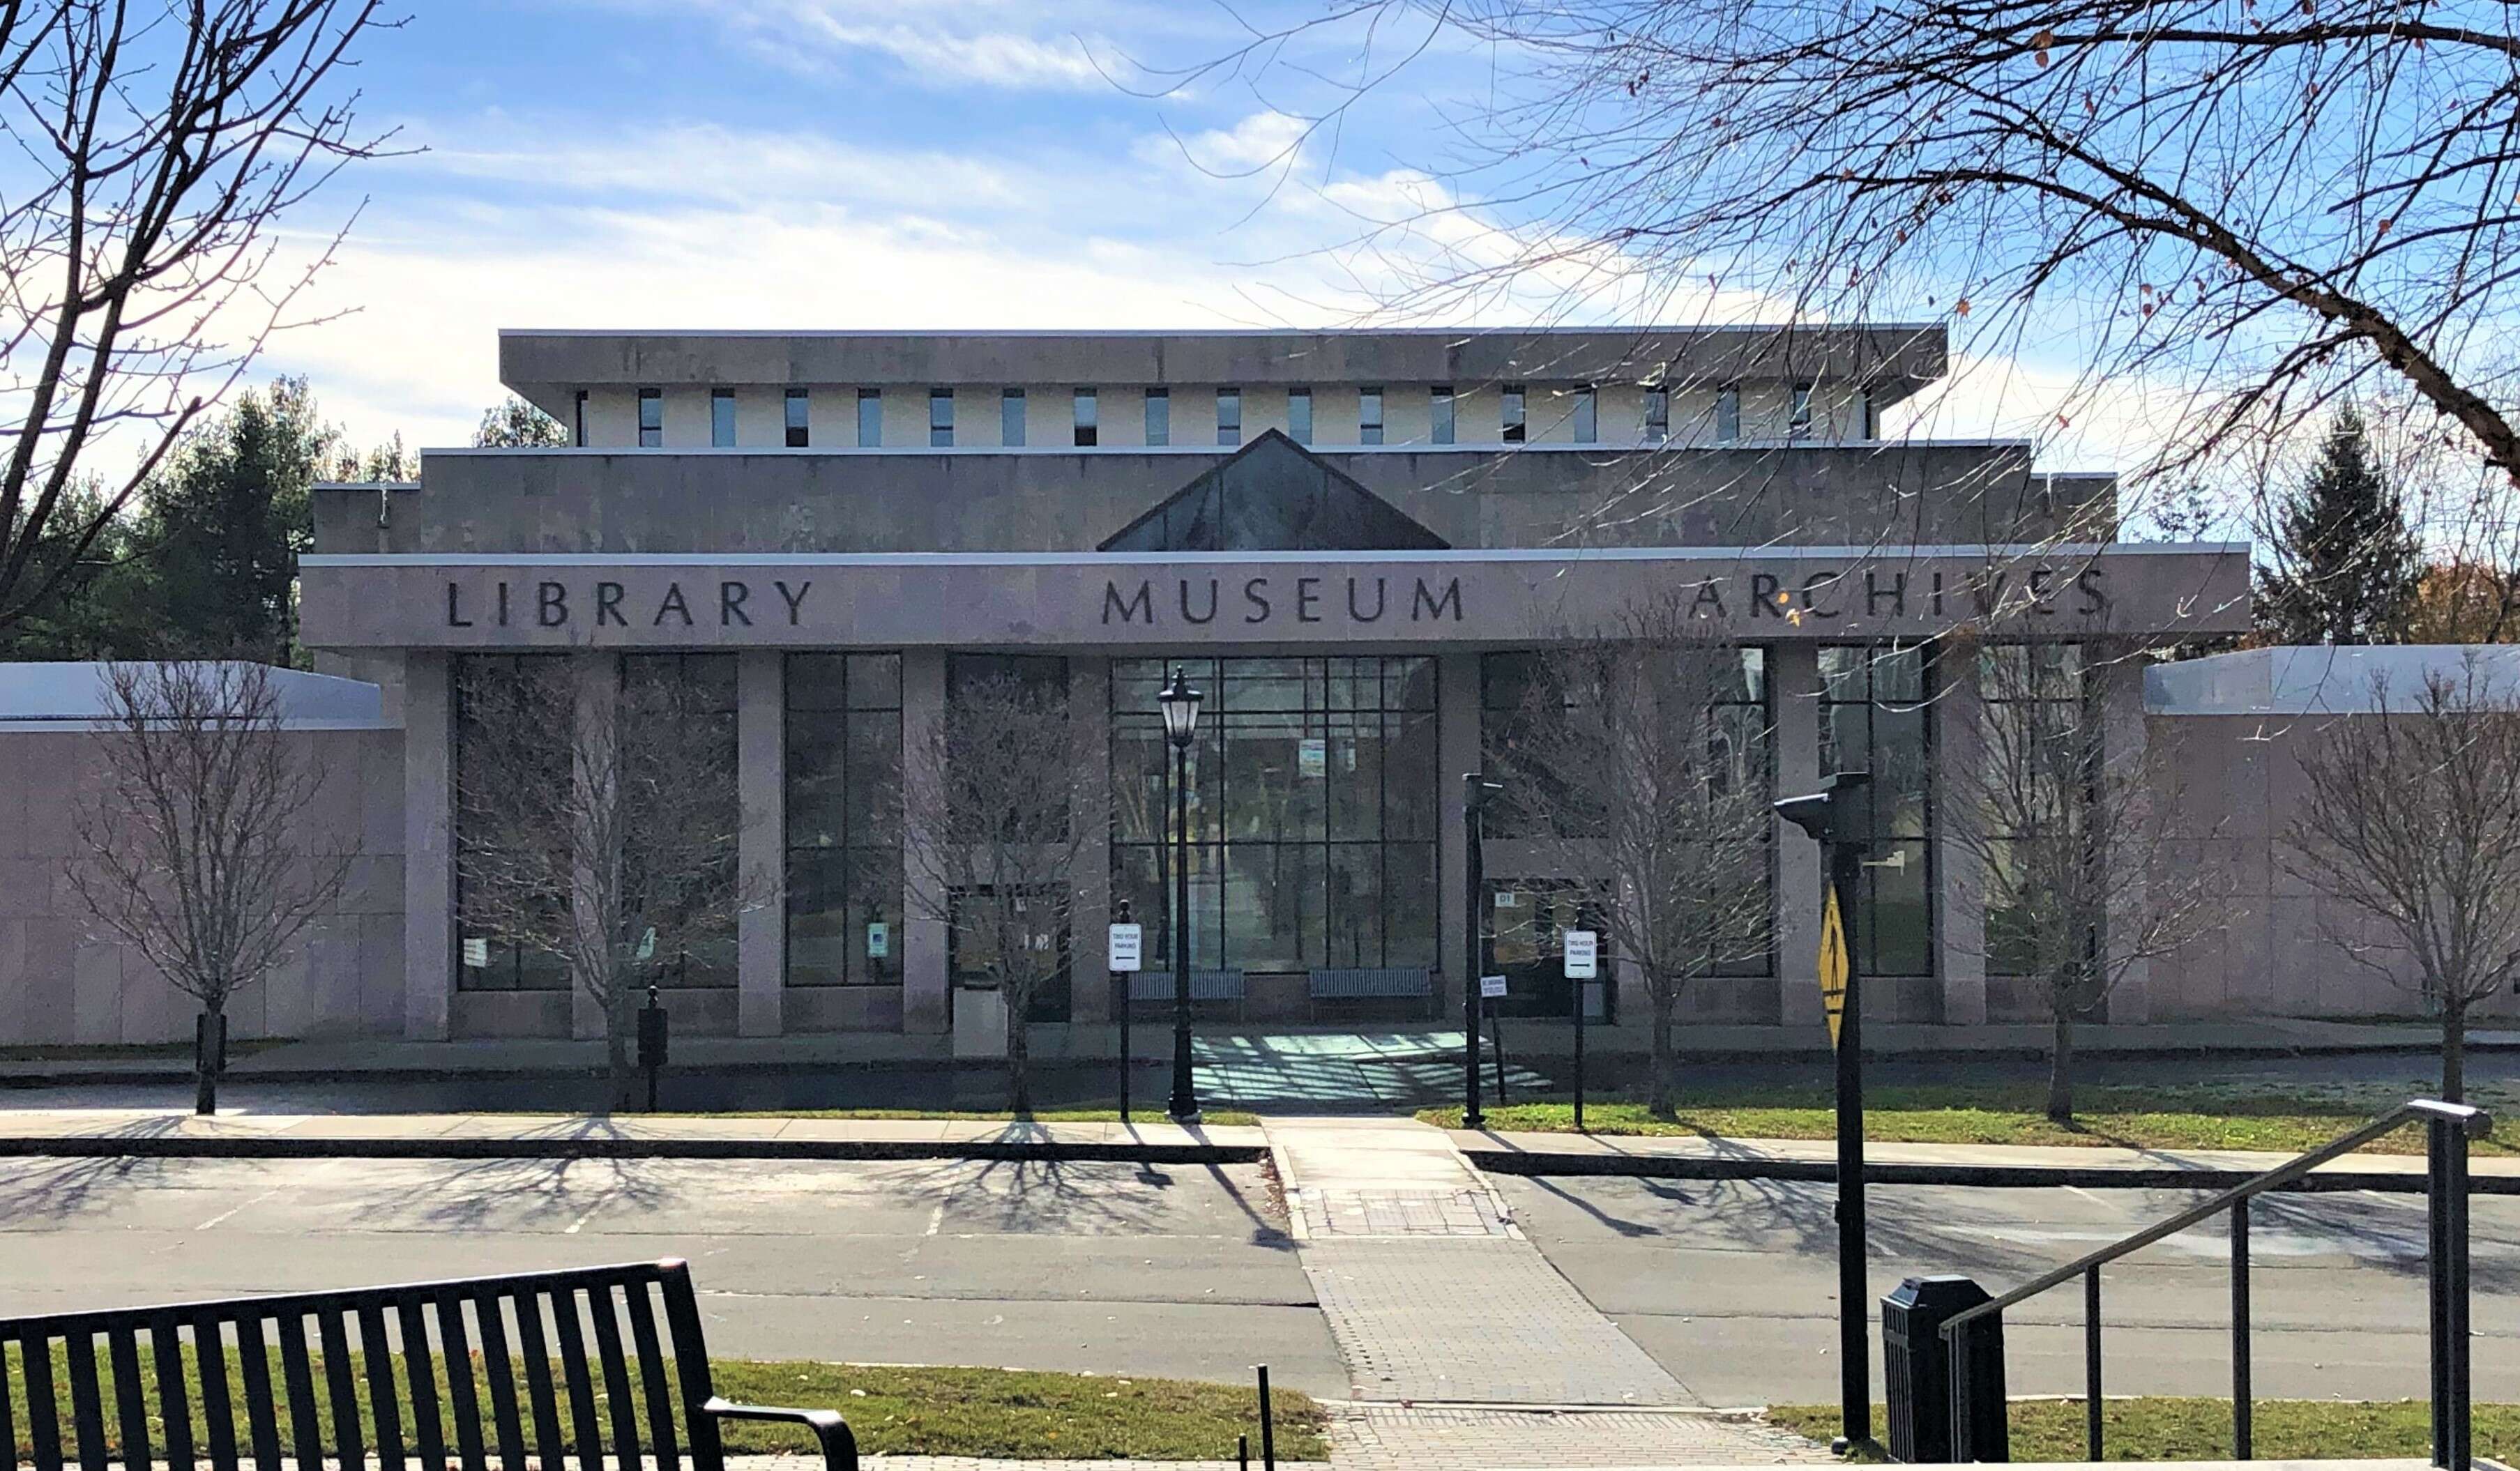 a low concrete building with big windows and a letters above the entrance that say Maine state library museum archives